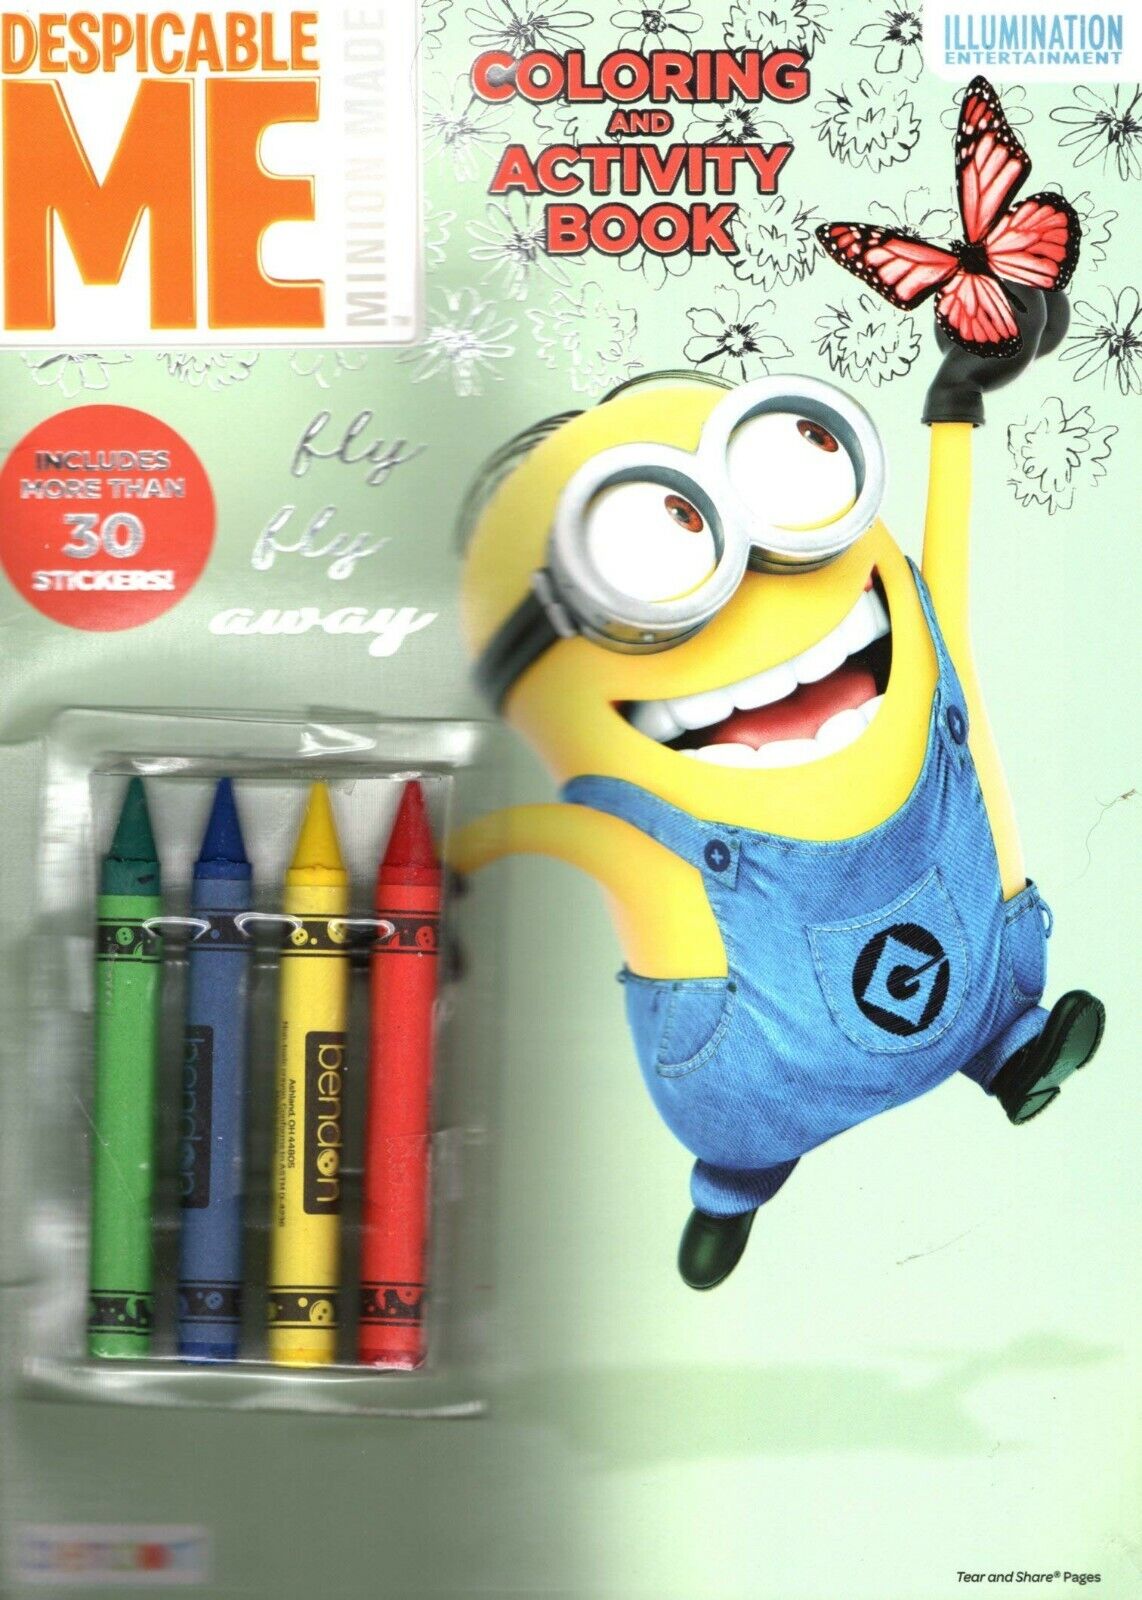 Dispicable Me - Coloring & Activity Book - Includes 30 Stickers